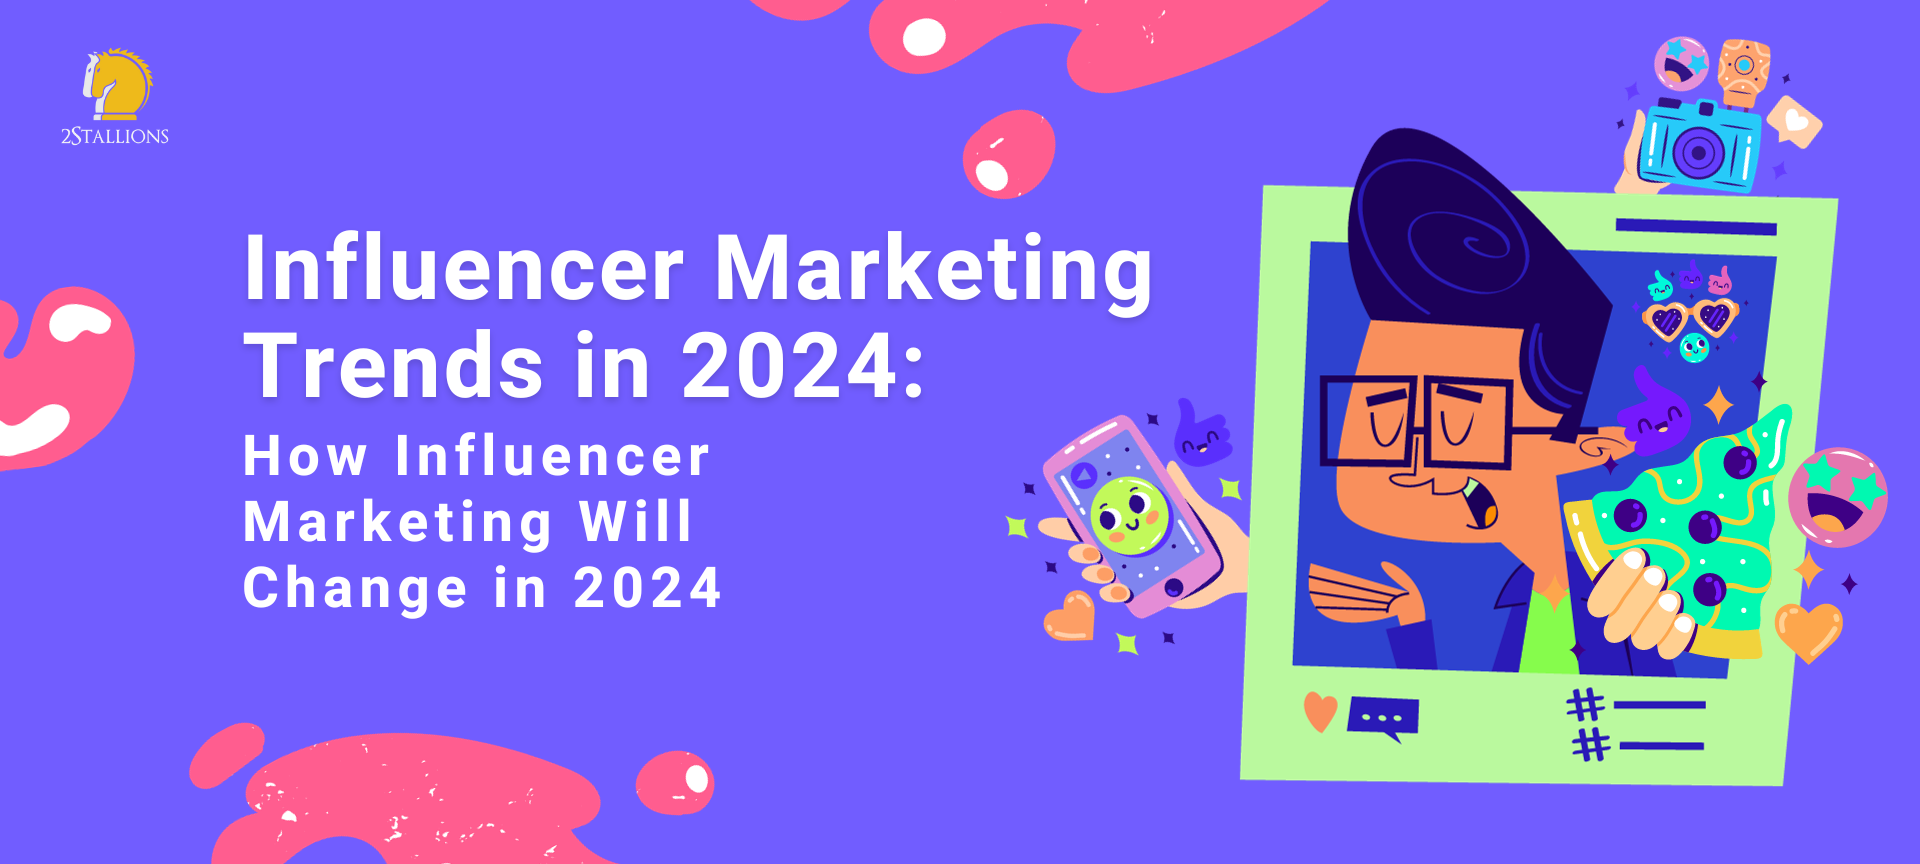 Influencer Marketing in 2024: What to Expect & Jobs to Hire